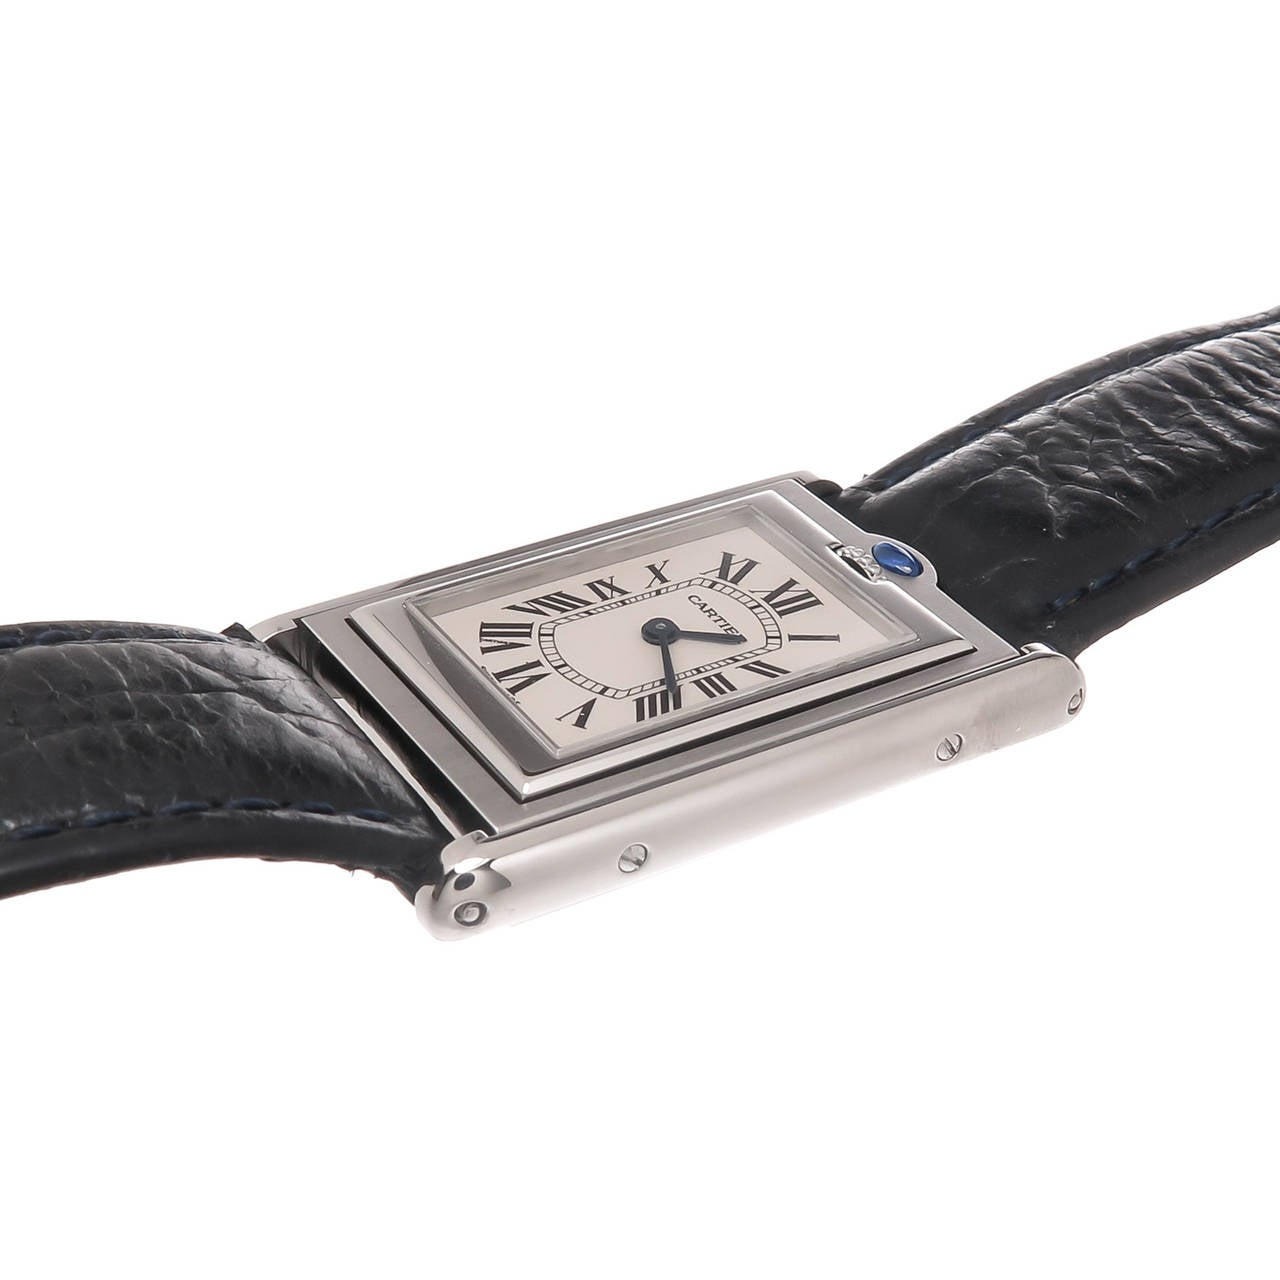 Circa 2005 Cartier Tank Basculante Stainless Steel Reversible Wrist Watch, measuring 1 3/8 inch in length X 7/8 inch wide. Quartz Movement, White dial with Black Roman Numerals and a Sapphire Cabochon set above the crown. New Black Textured Grain